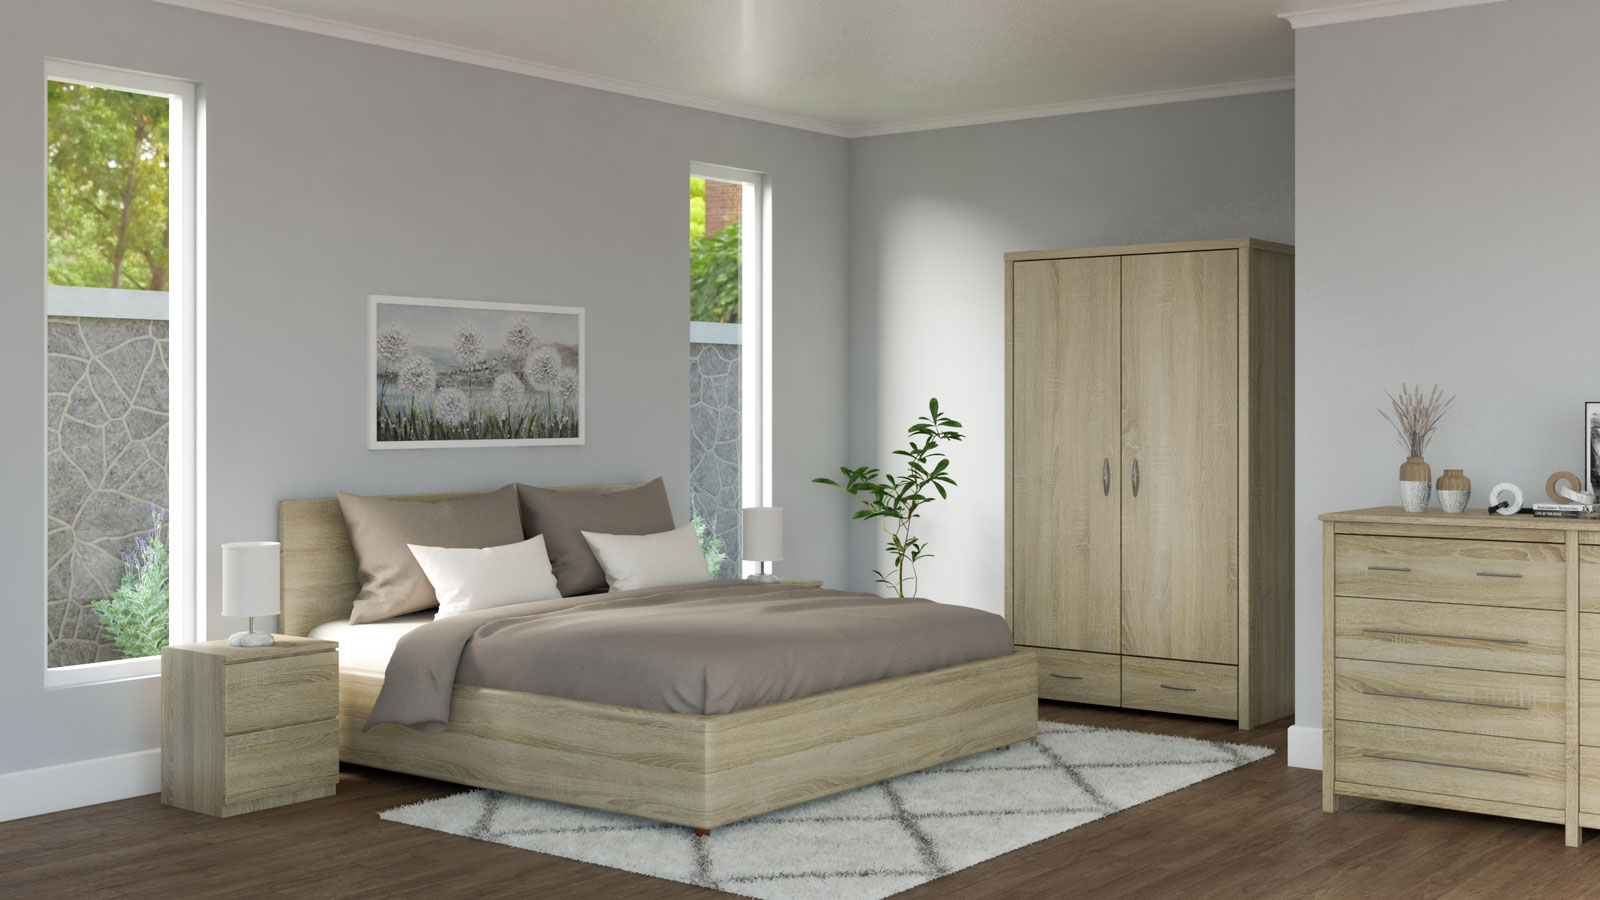 What Color Bedding Goes With Oak Furniture